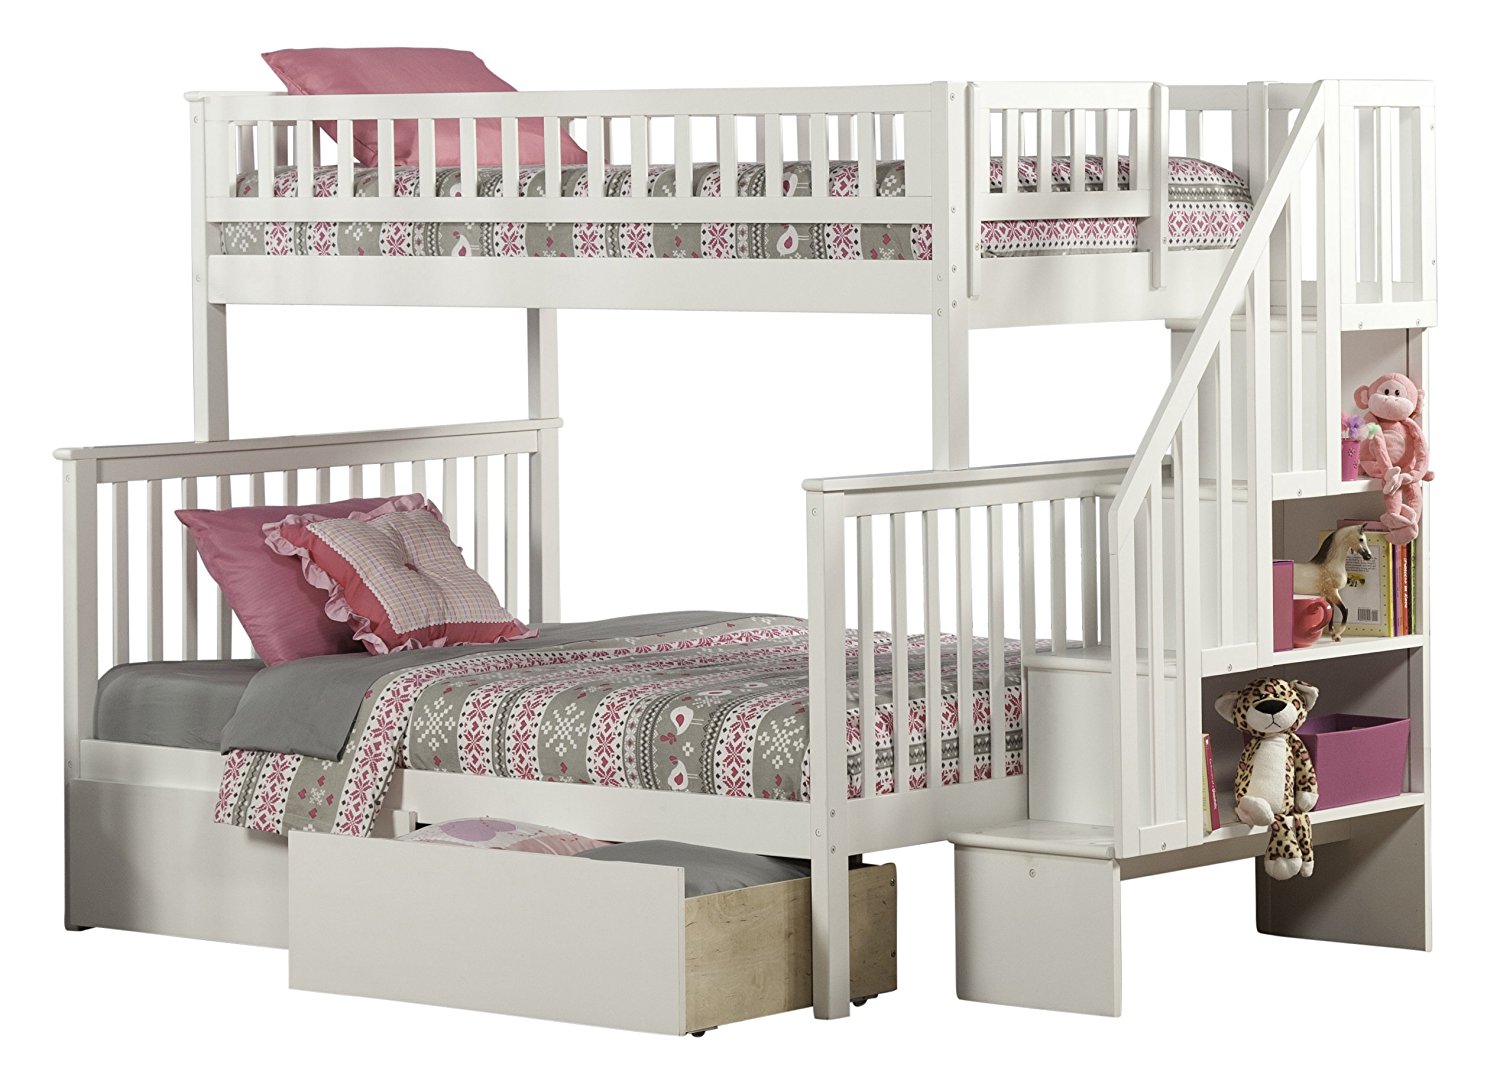 Woodland Staircase Bunk Bed with Urban Bed Drawers, White, Twin Over Full